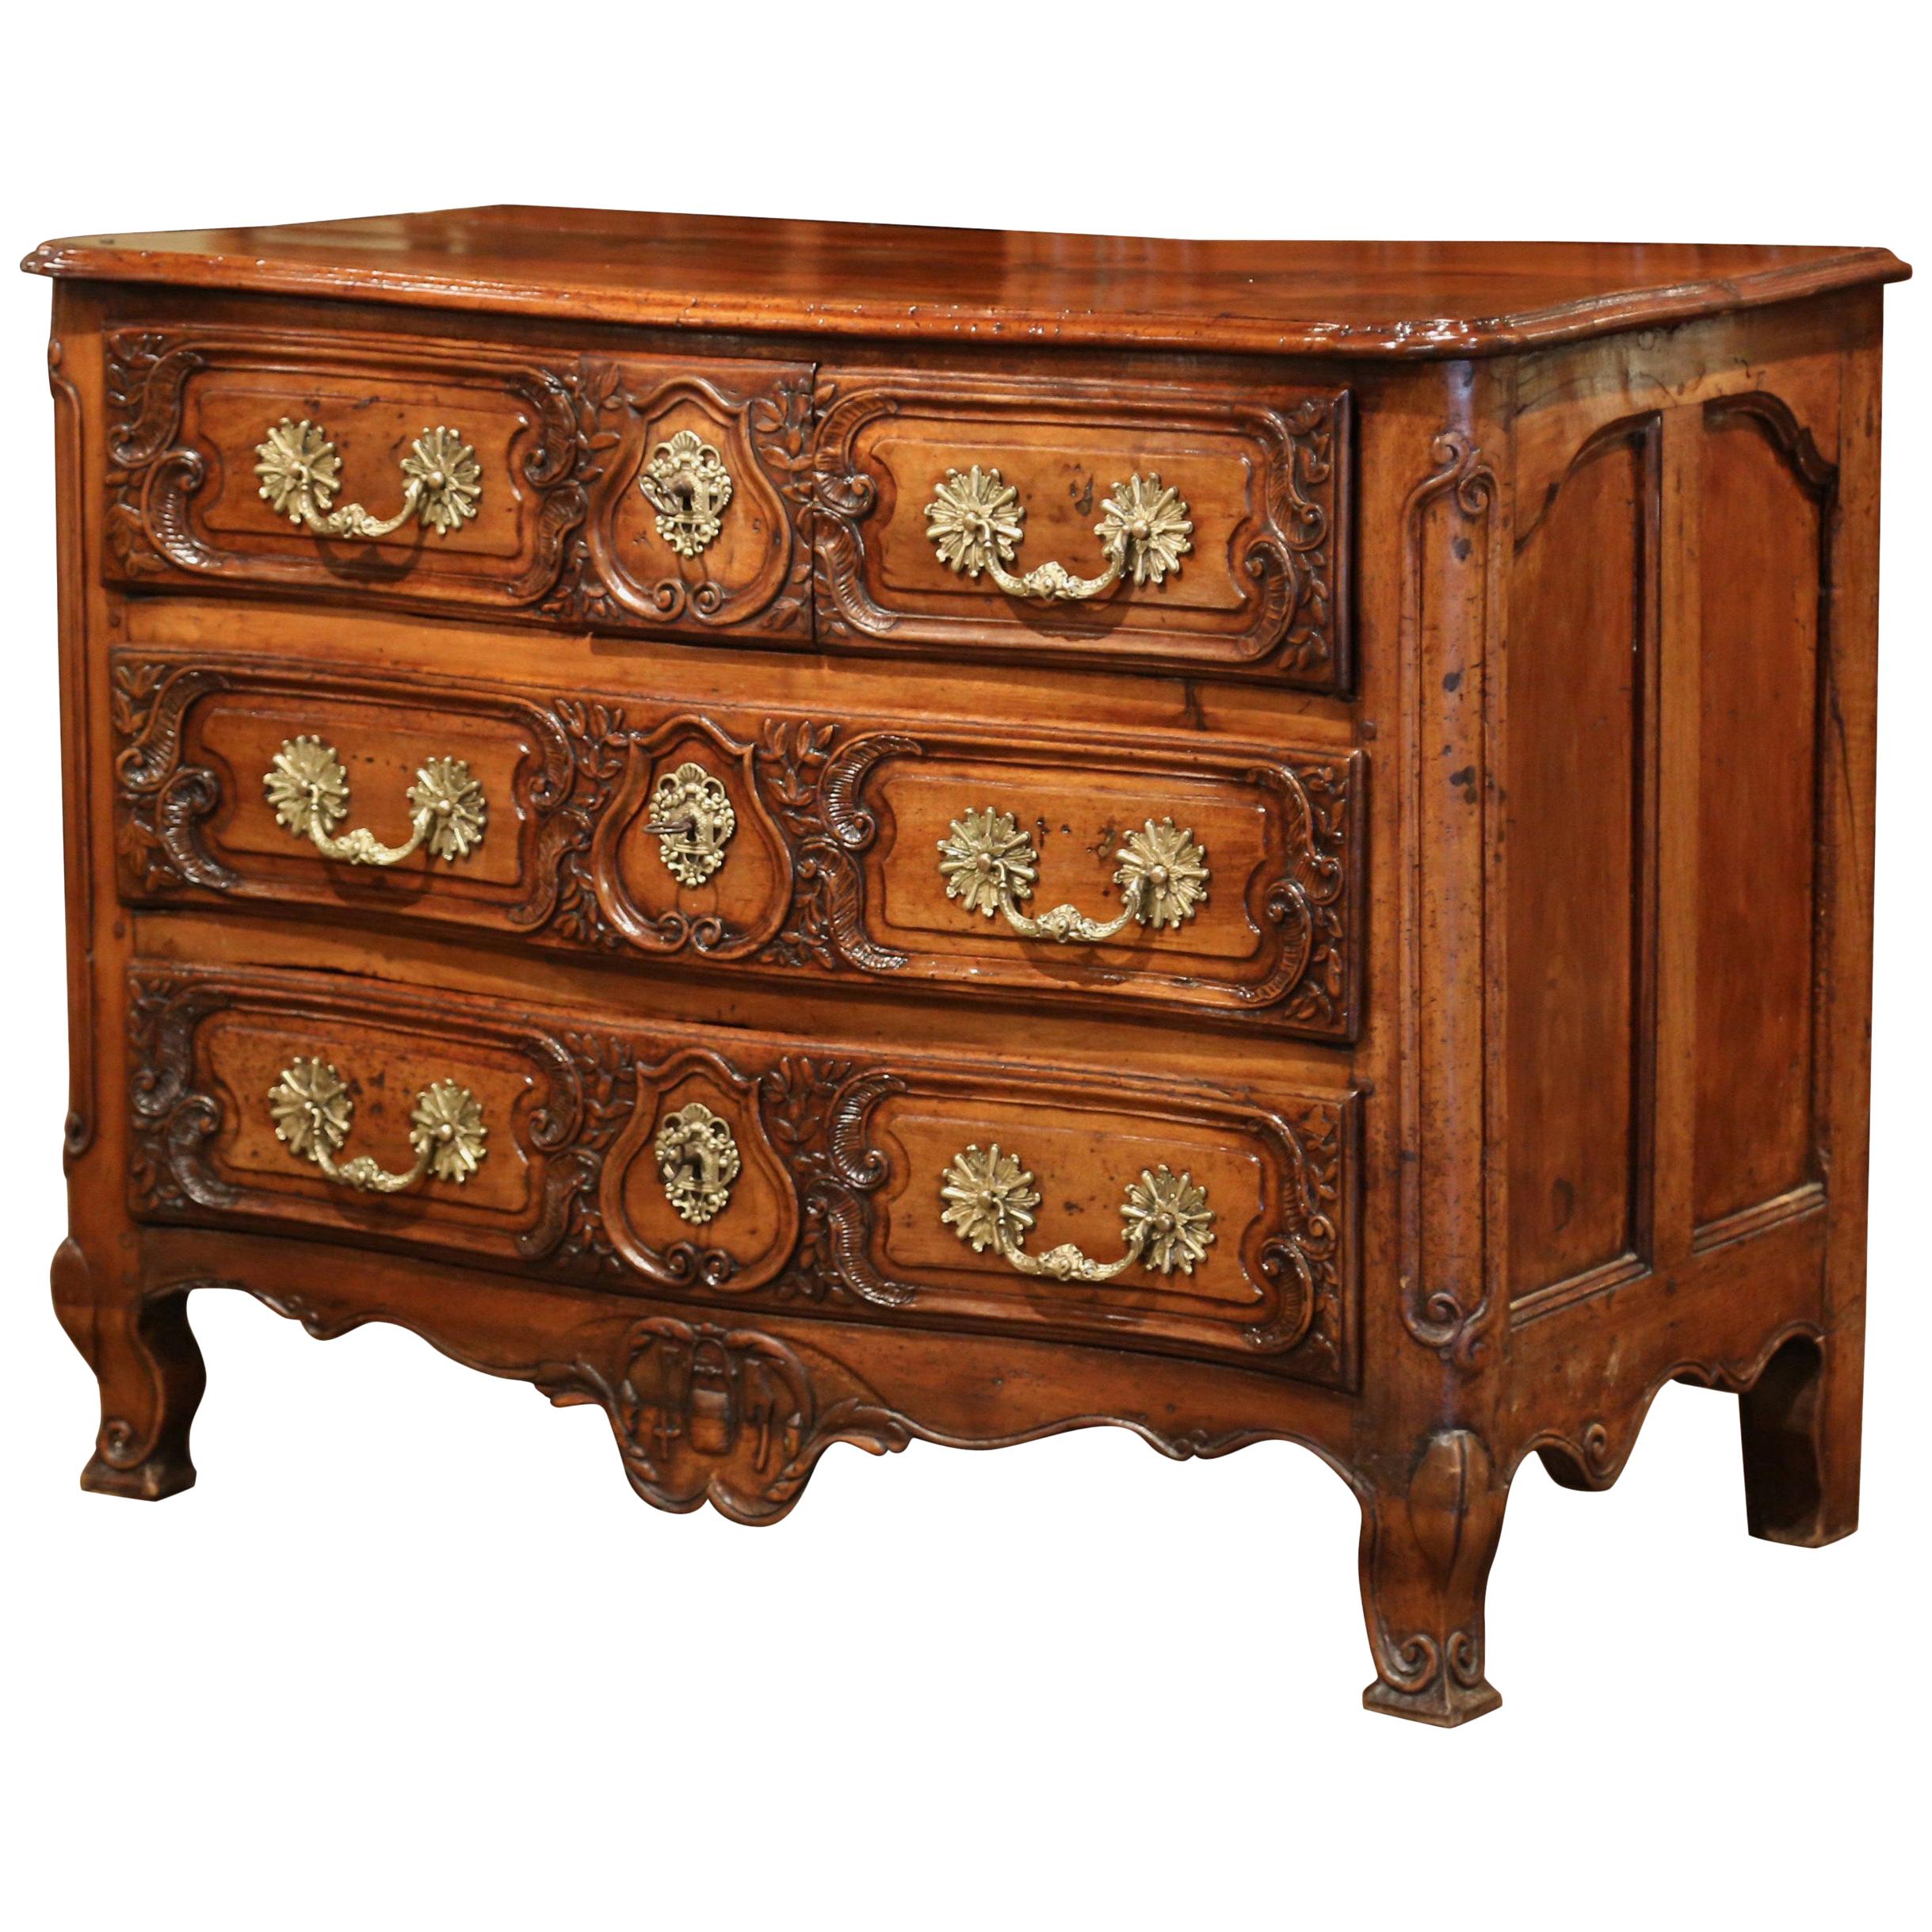 18th Century French Louis XV Carved Walnut Bombe Chest of Drawers from Lyon